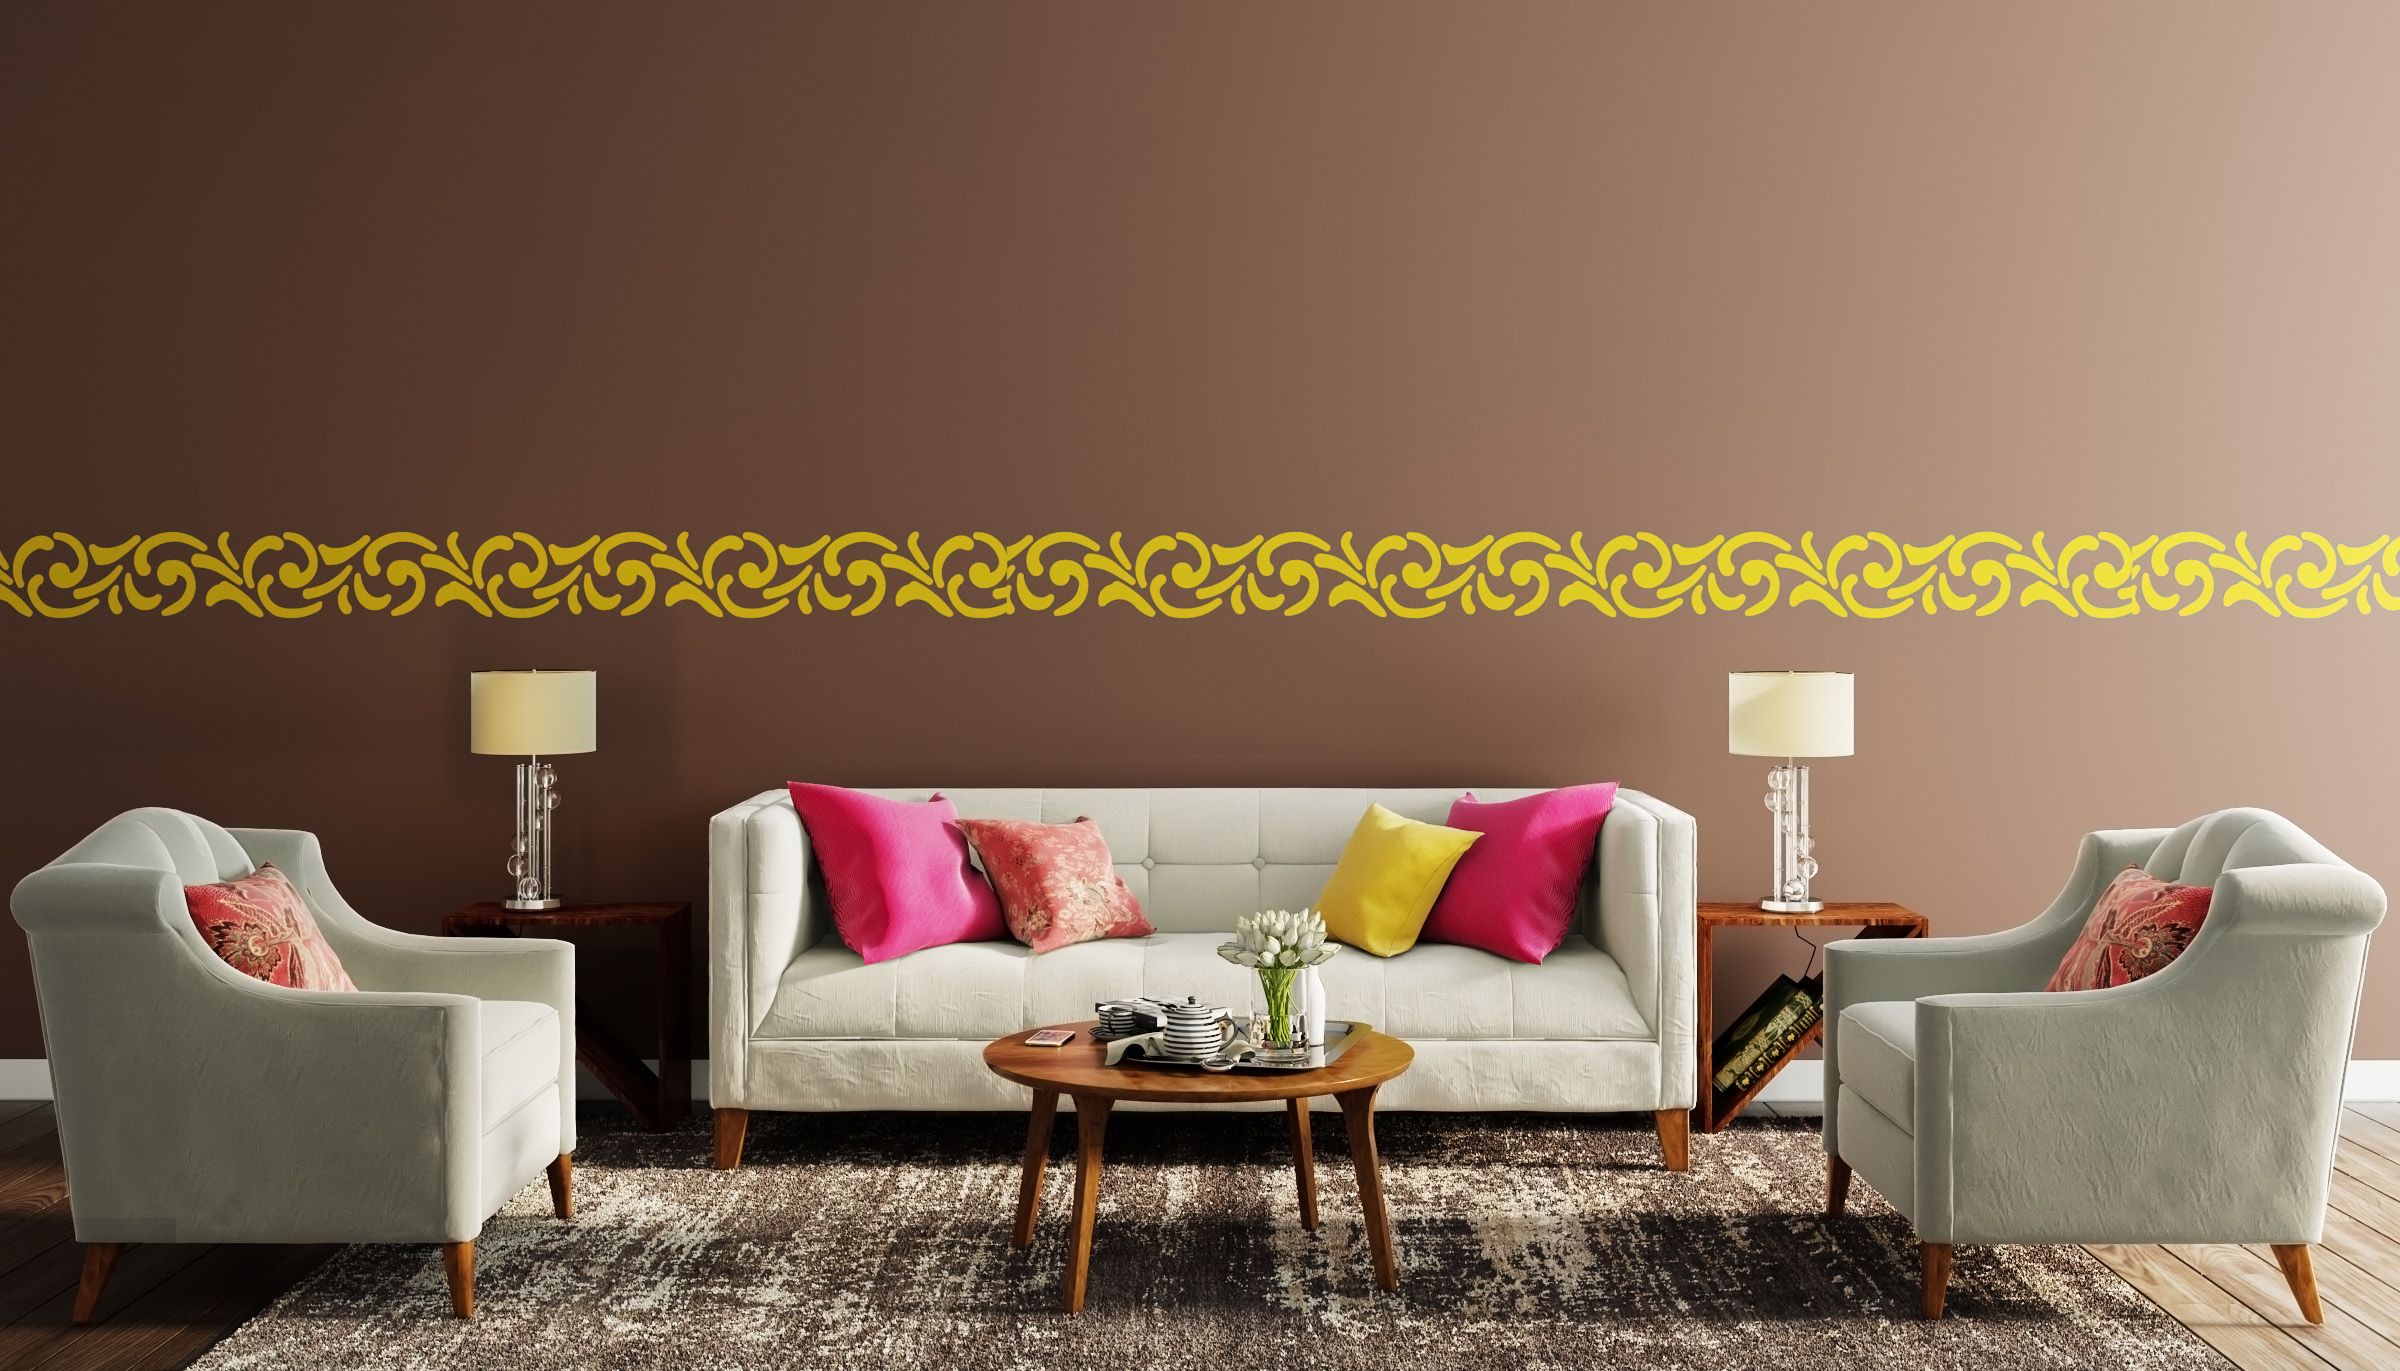 Classic Brown And Yellow Living Room Wall Design